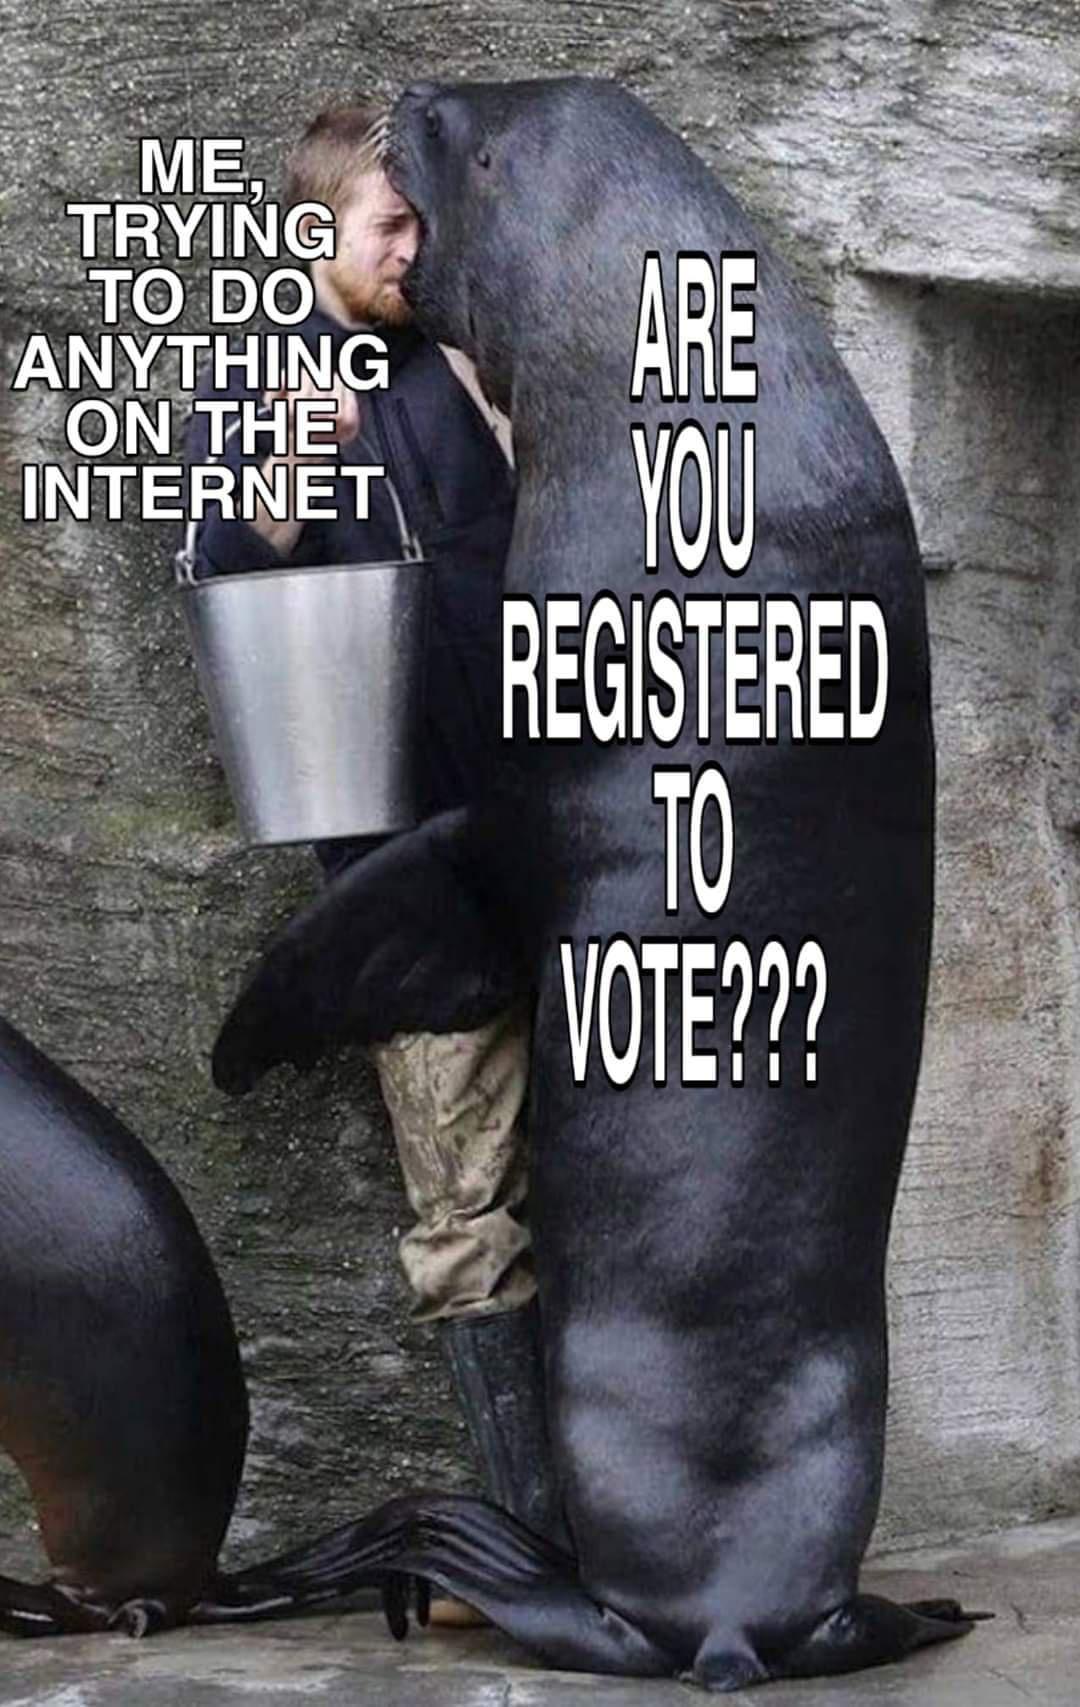 giant sealion - Me, Trying To Do Anything On The Internet Are You Registered To Vote???